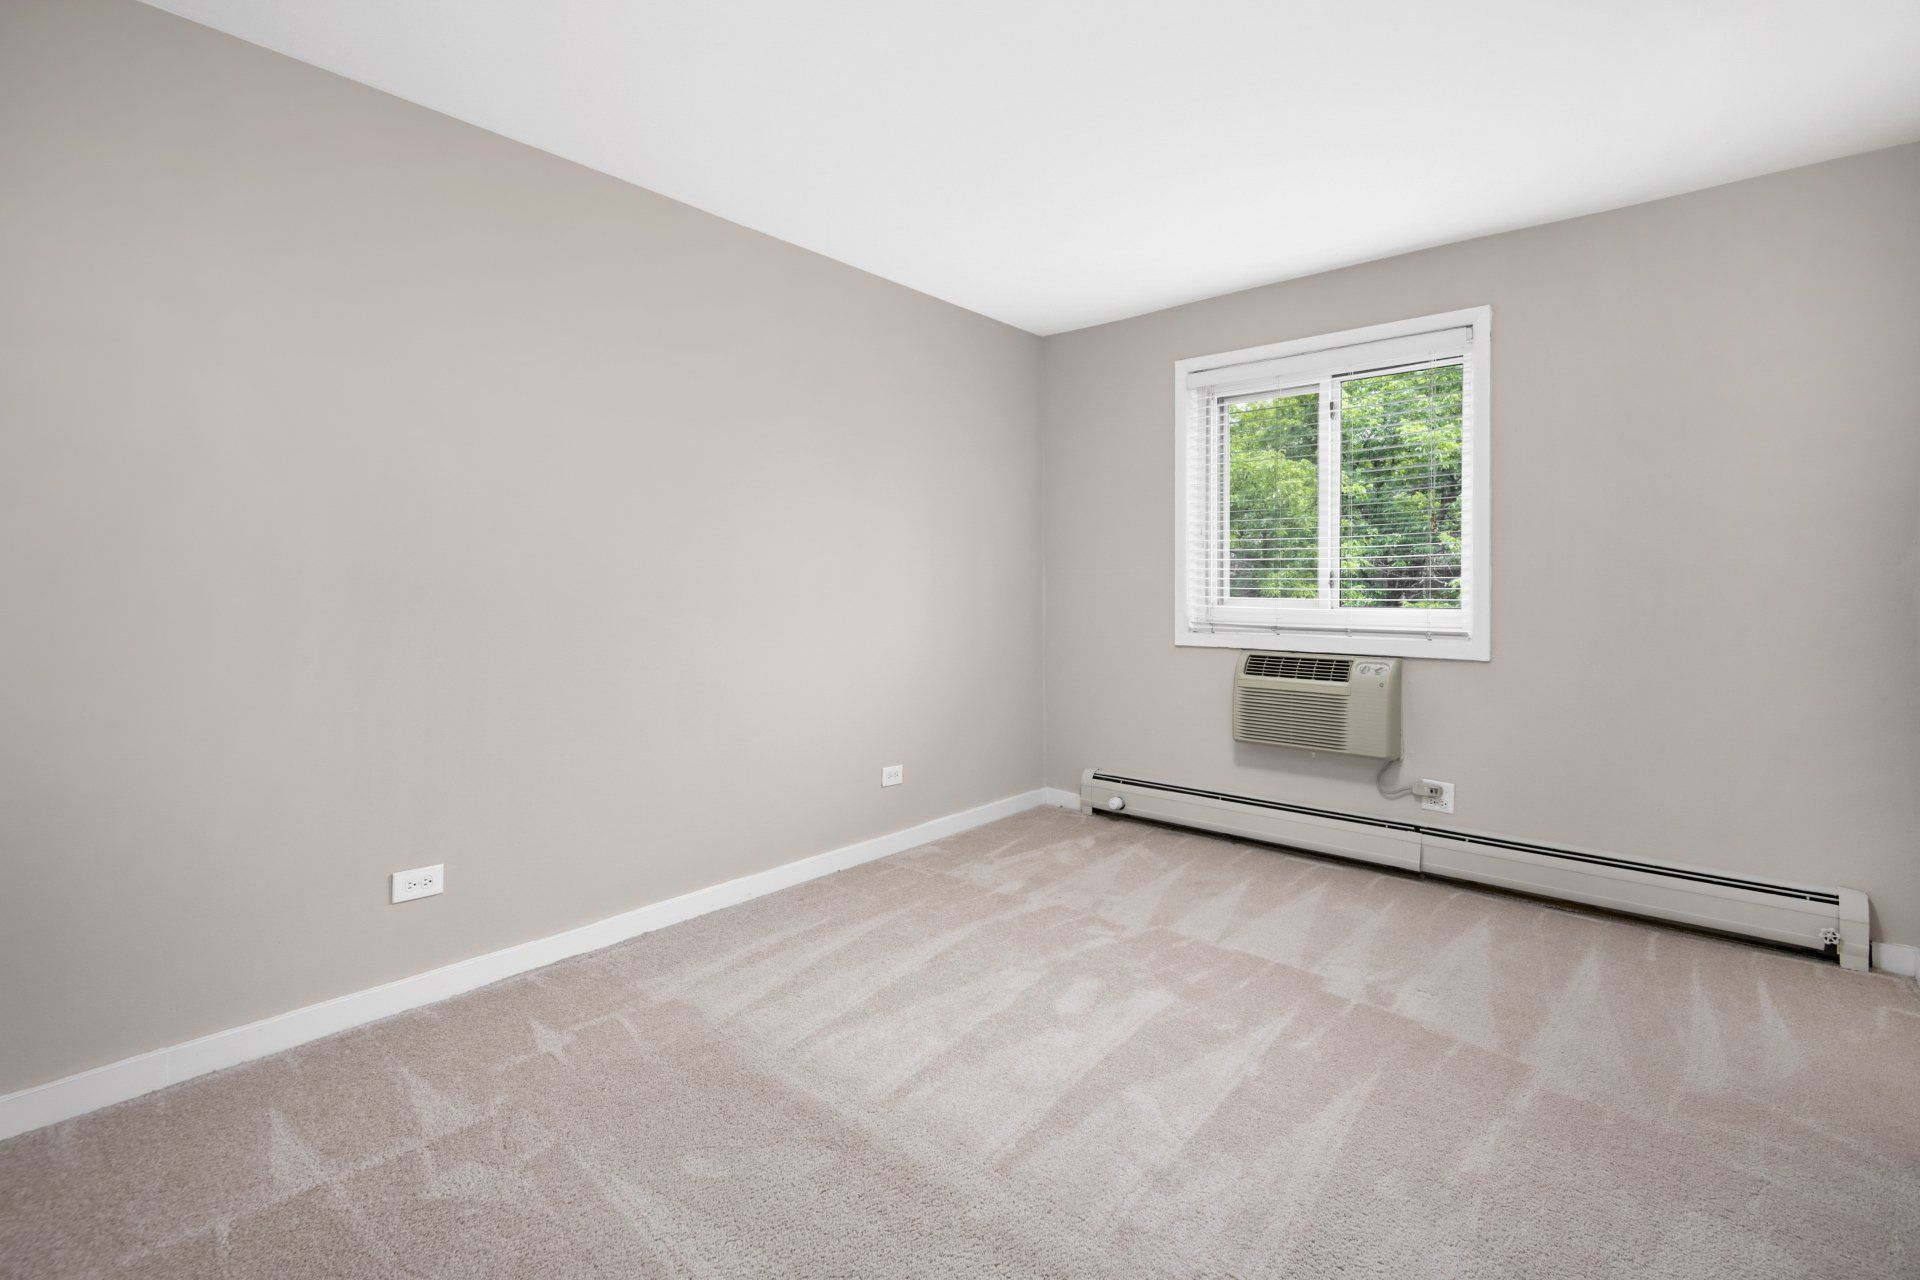 An empty bedroom with a window, carpet, and air conditioner at Reside 707.